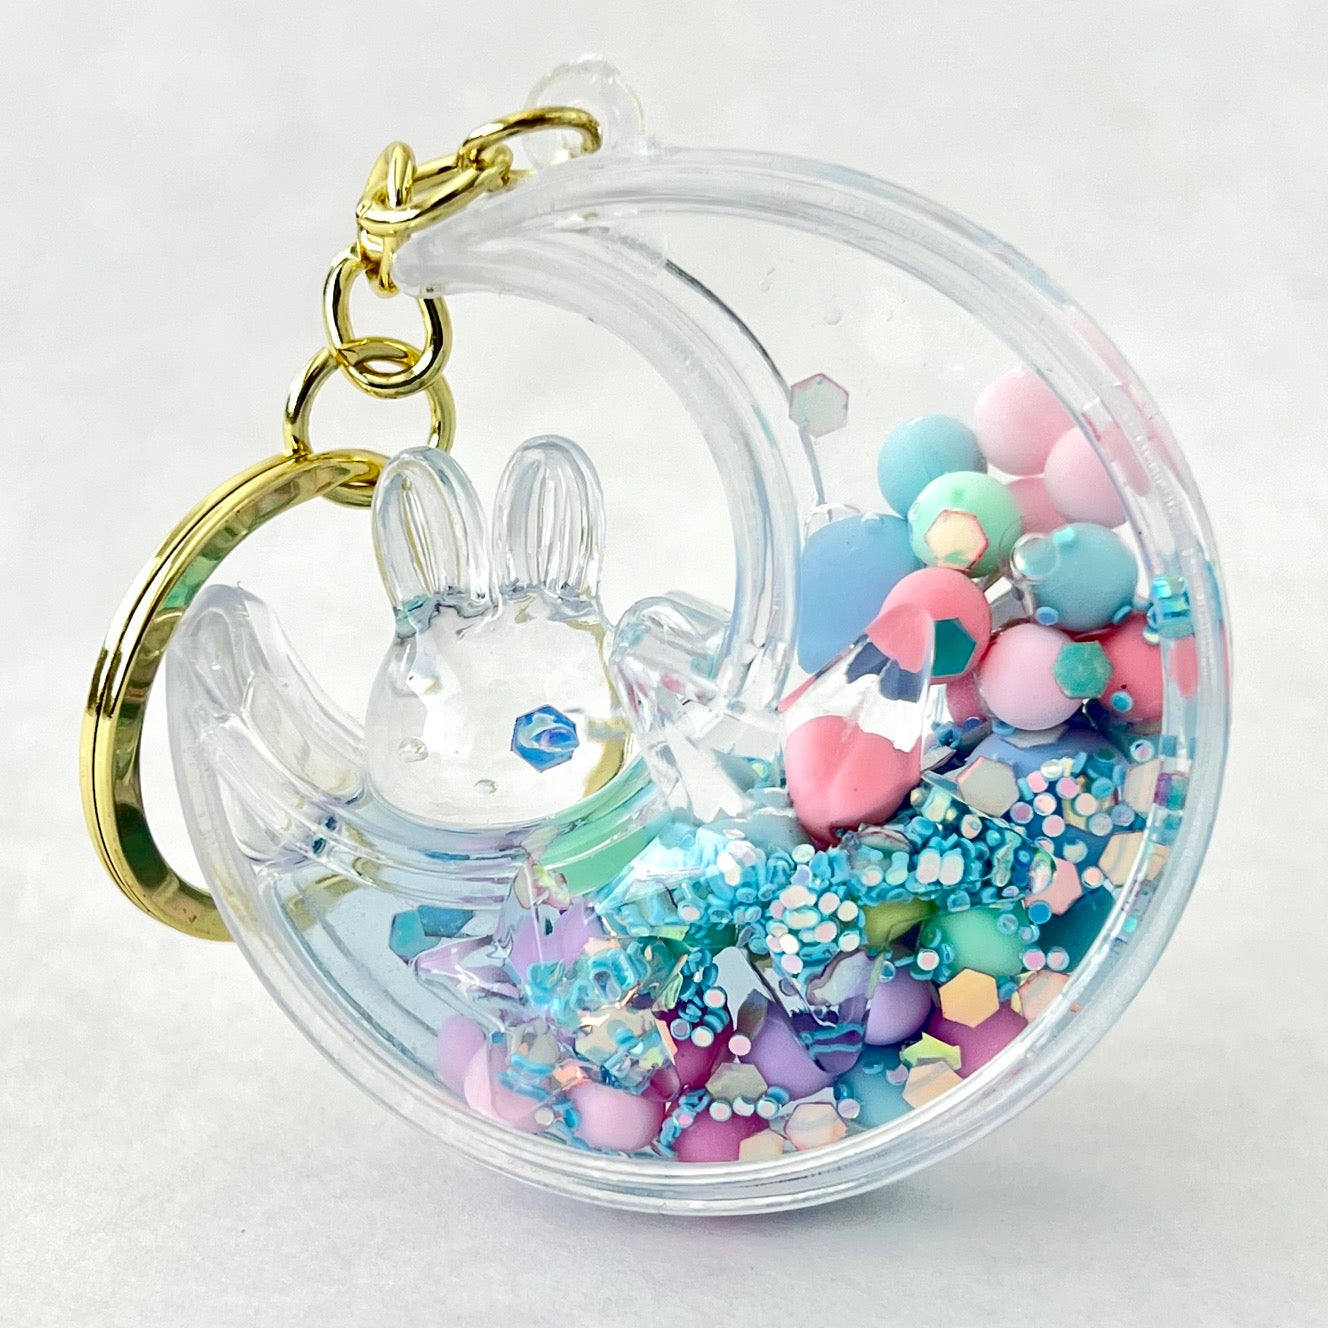 The Rabbit On The Moon Keychain – Chiherah Creations